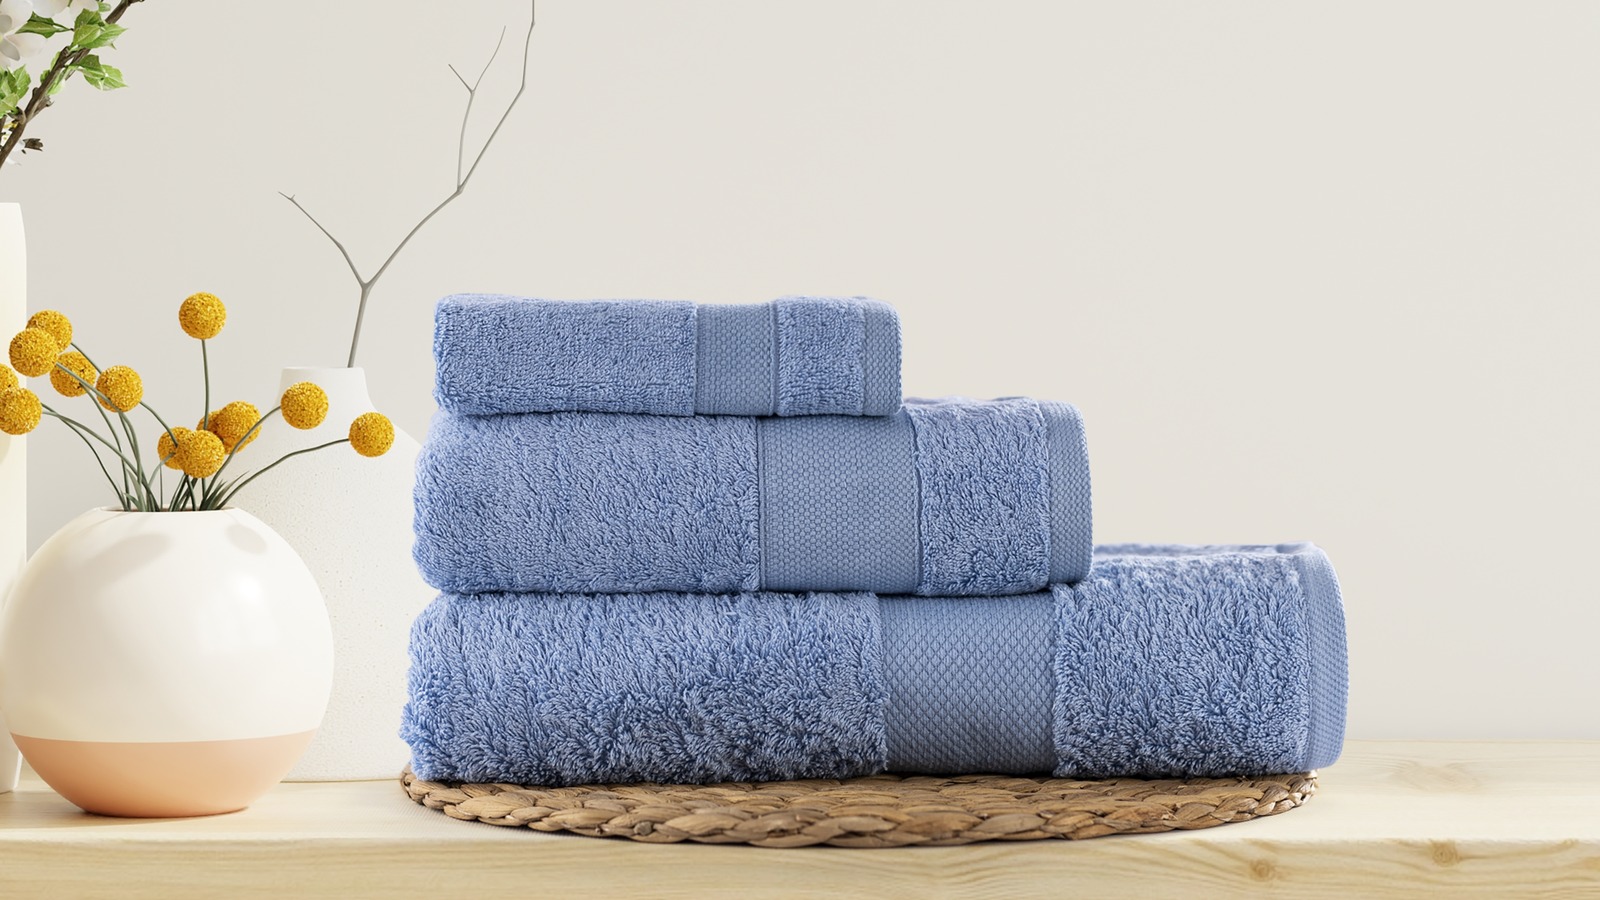 https://www.housedigest.com/img/gallery/heres-how-many-towels-you-really-need-to-own/l-intro-1661335847.jpg